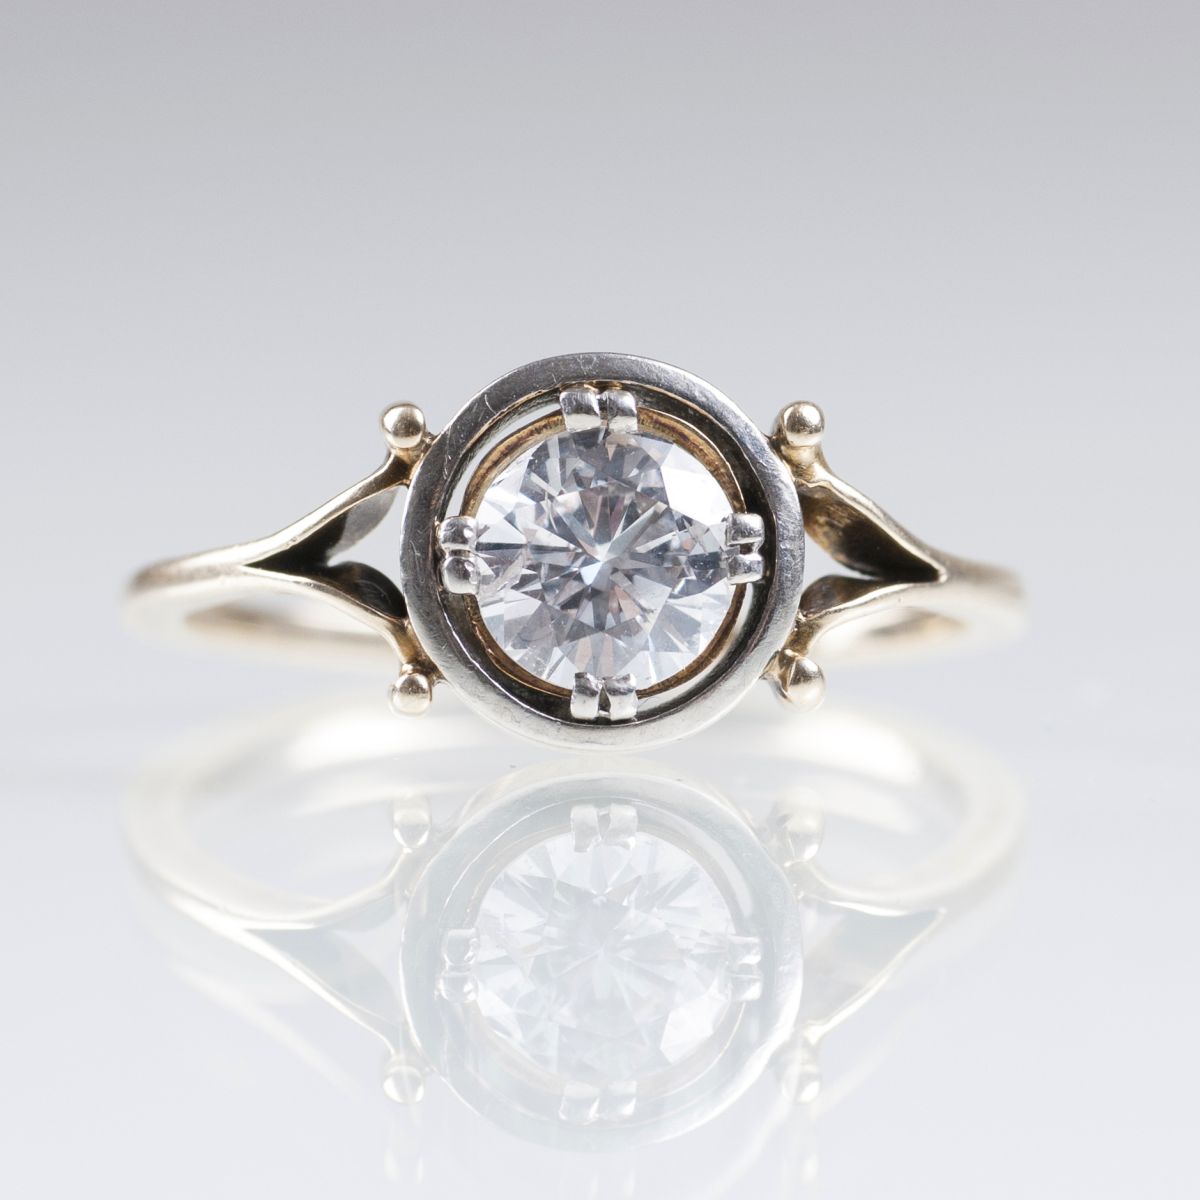 A solitaire ring with old cut diamond